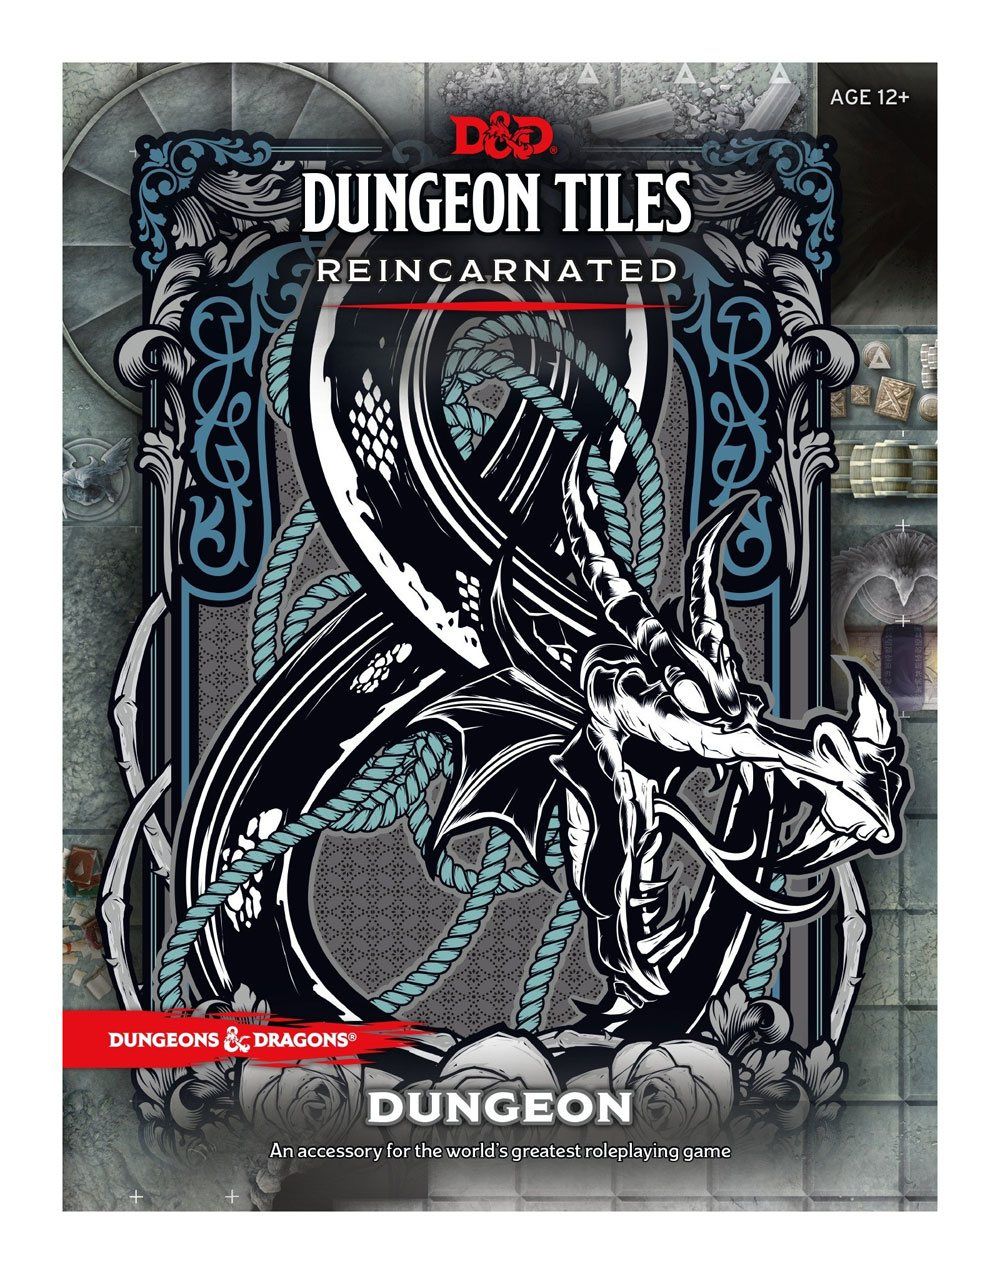 Dungeons & Dragons RPG Dungeon Tiles Reincarnated: Dungeon Wizards of the Coast